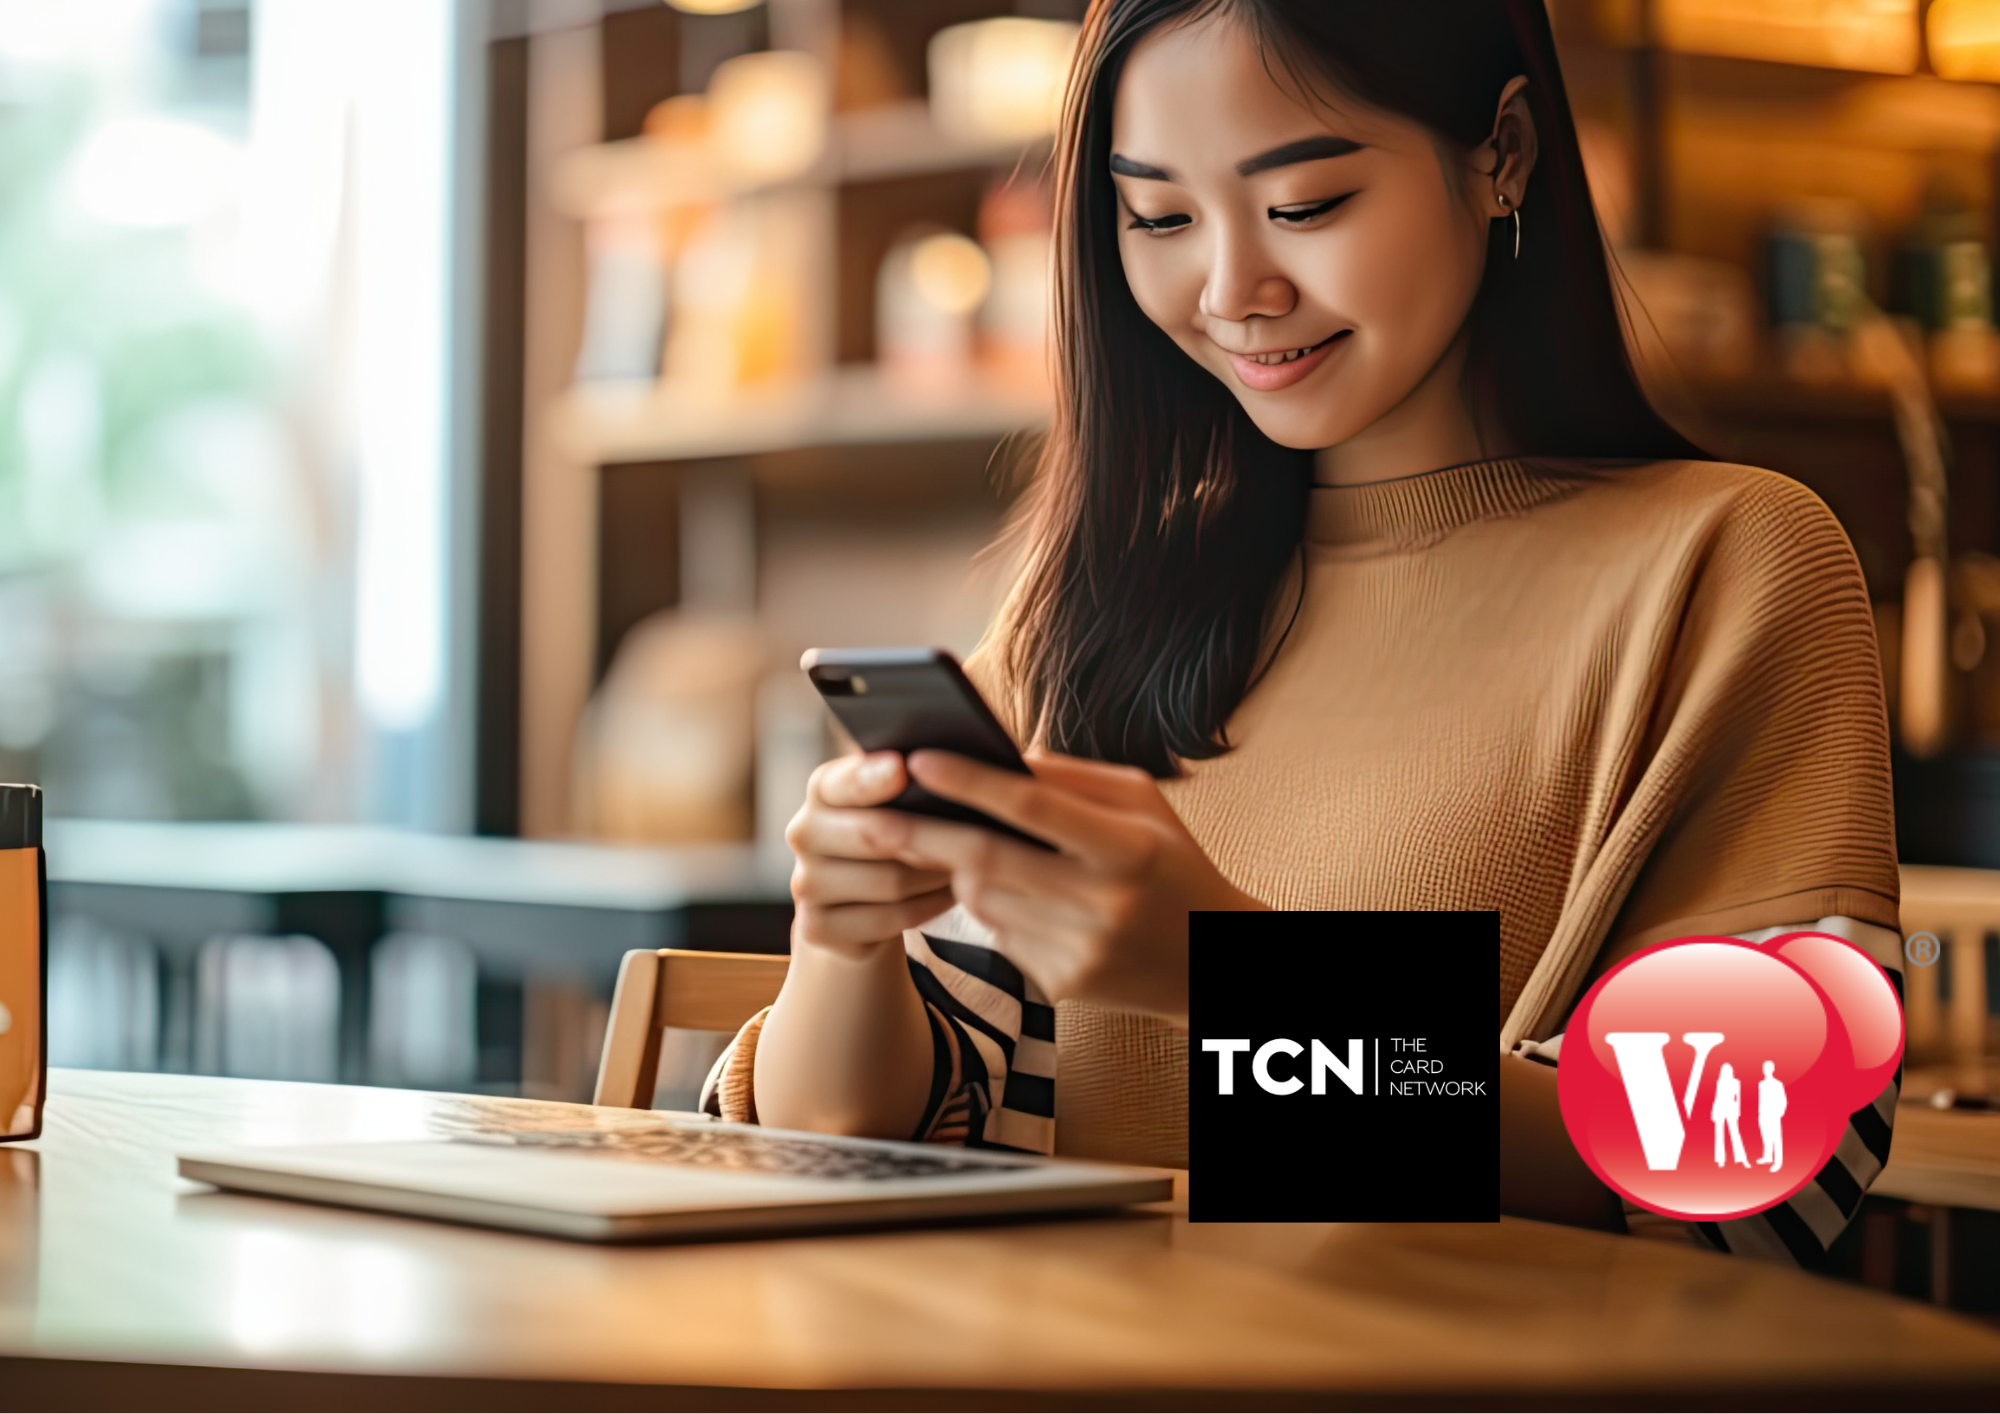 Vii and The Card Network (TCN) launch first-to-market eftpos digital gift card solution